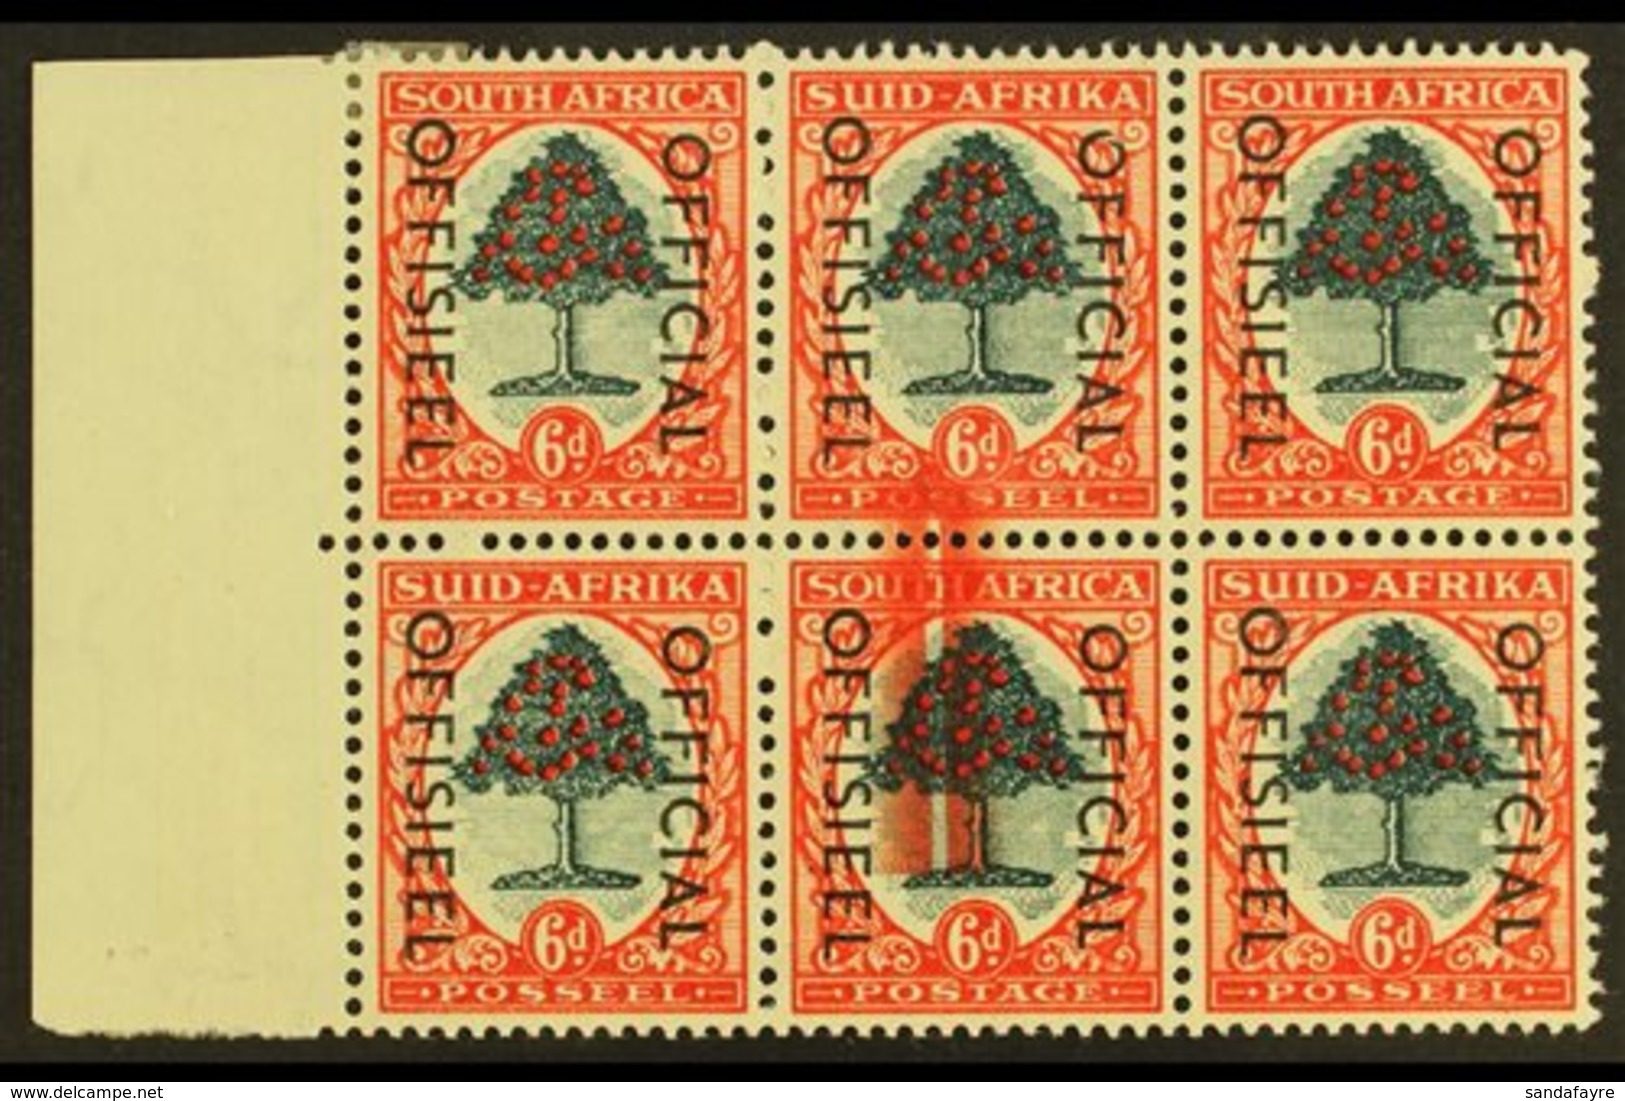 OFFICIAL VARIETY 1950-4 6d Green & Red-orange, Block Of Six With LARGE SCREEN FLAW, O46 Var, Very Fine Mint. For More Im - Sin Clasificación